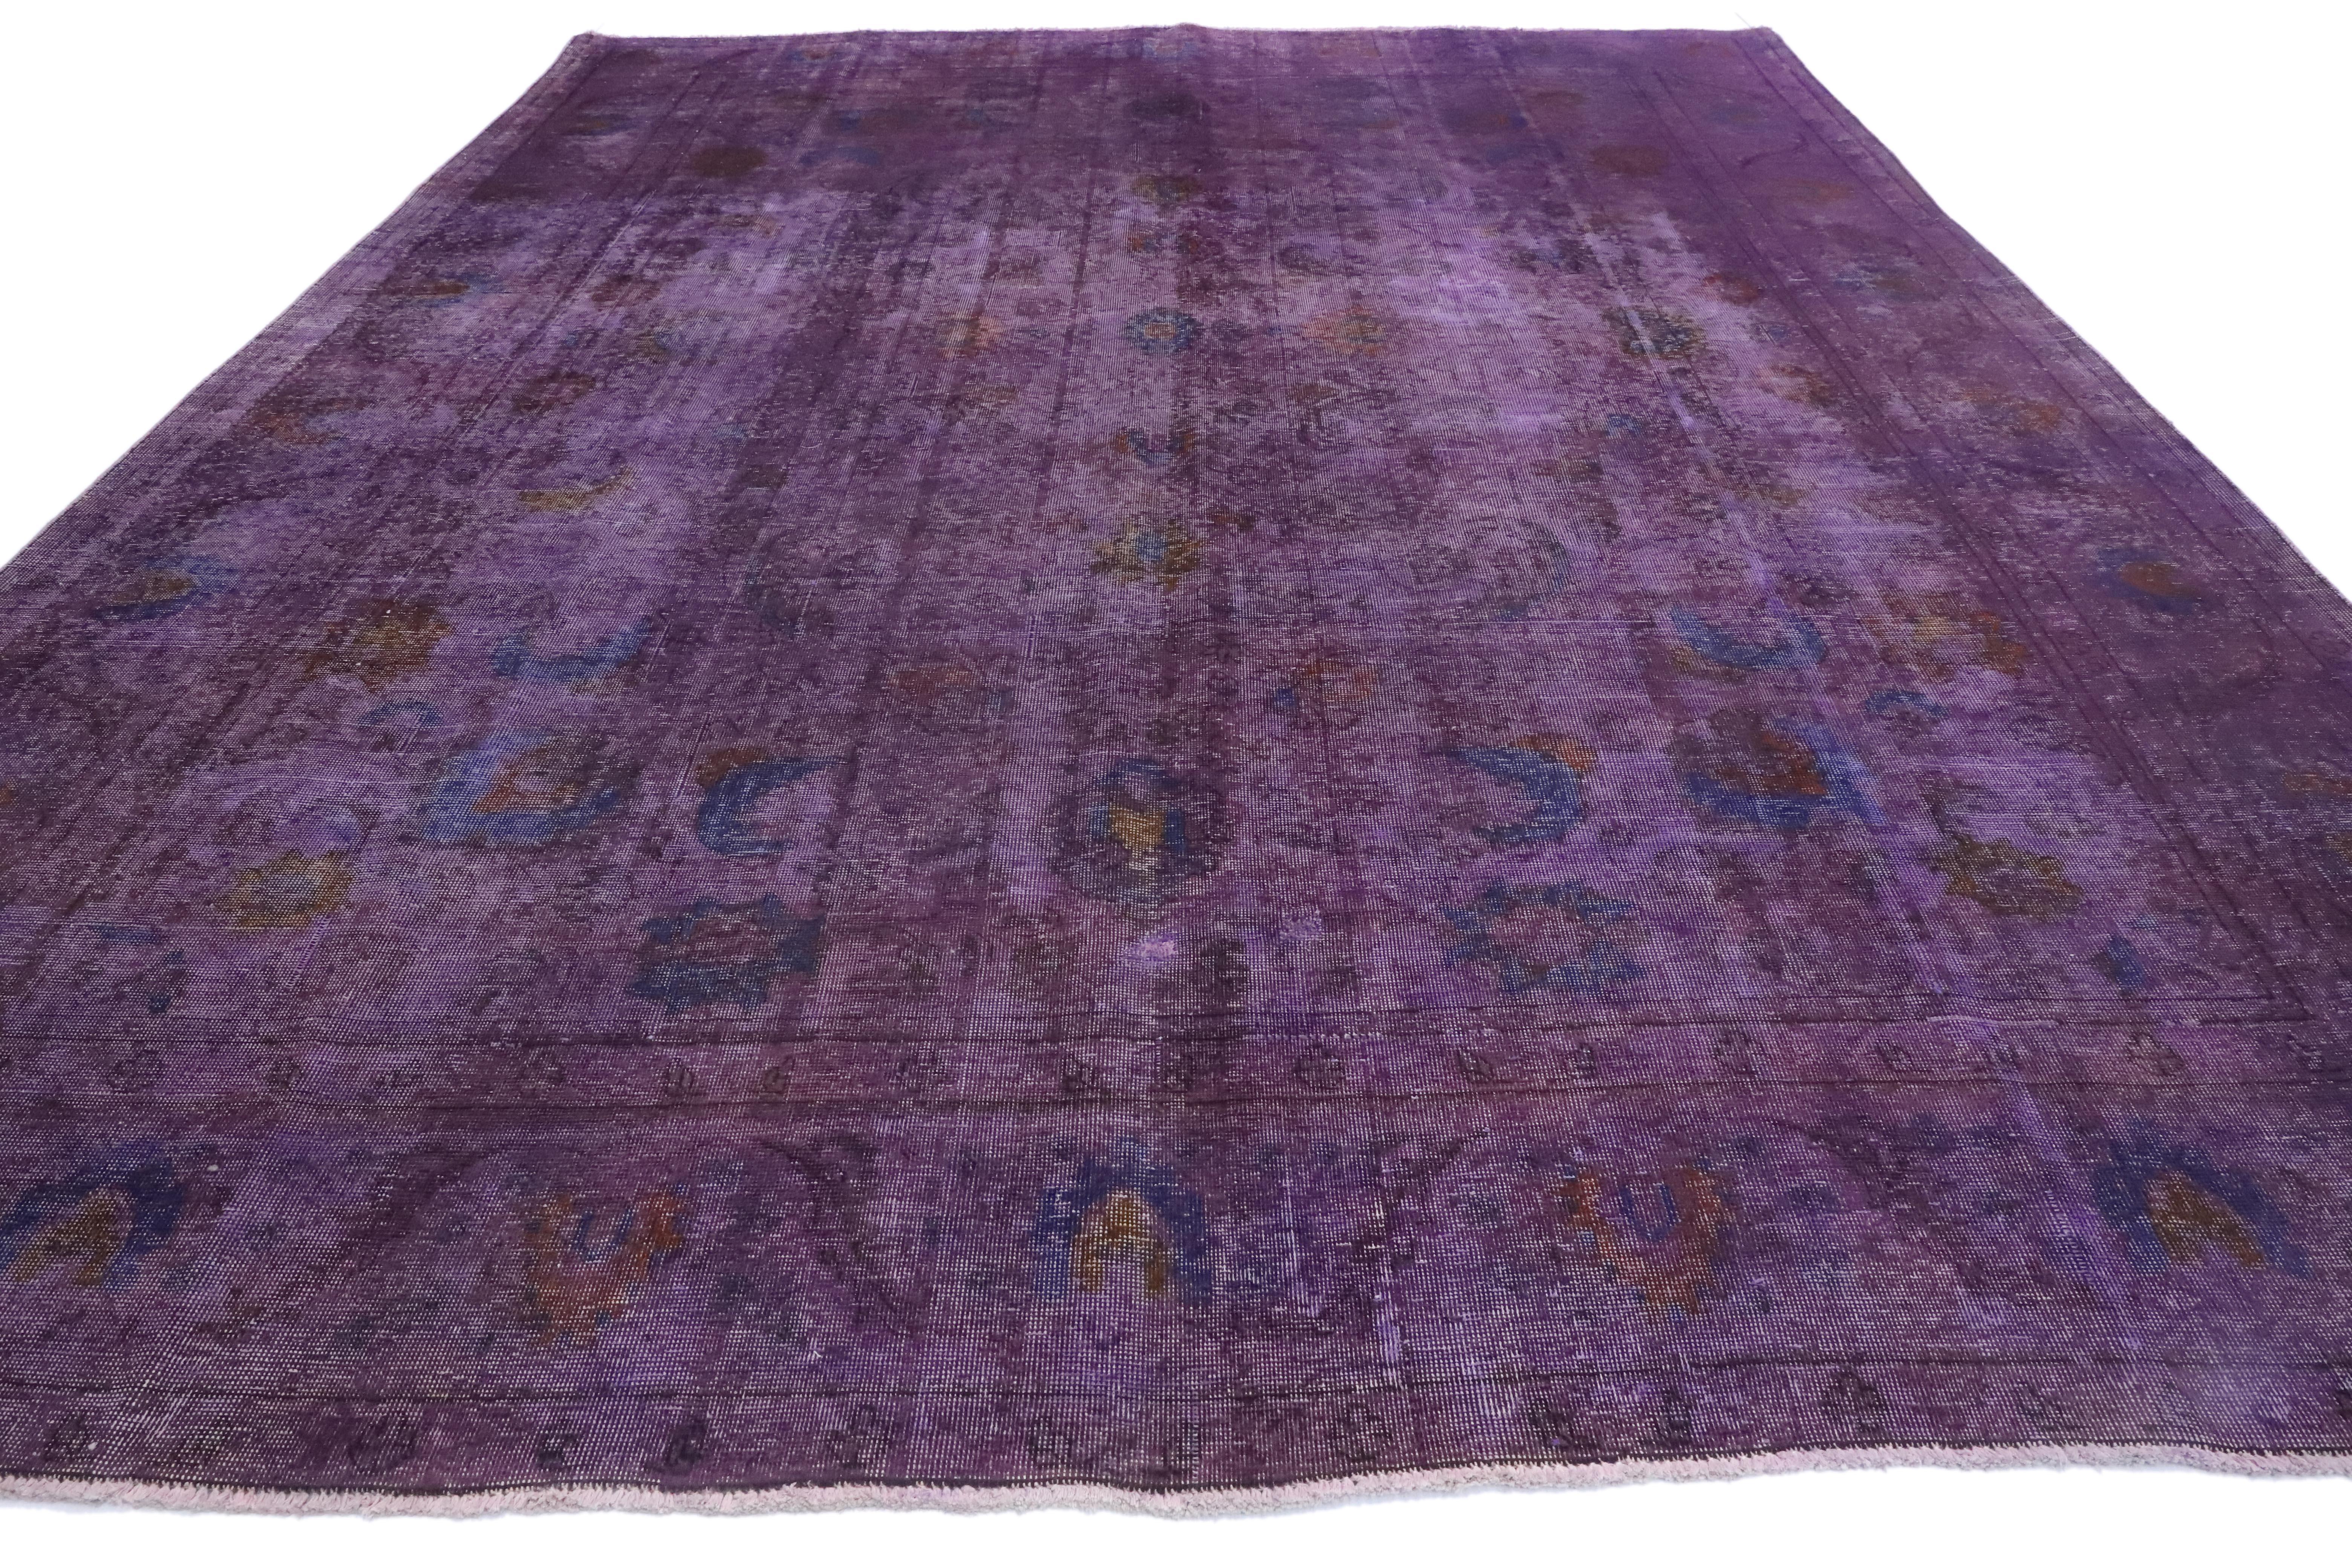 Wool Distressed Overdyed Purple Persian Rug with PostModern Memphis Style